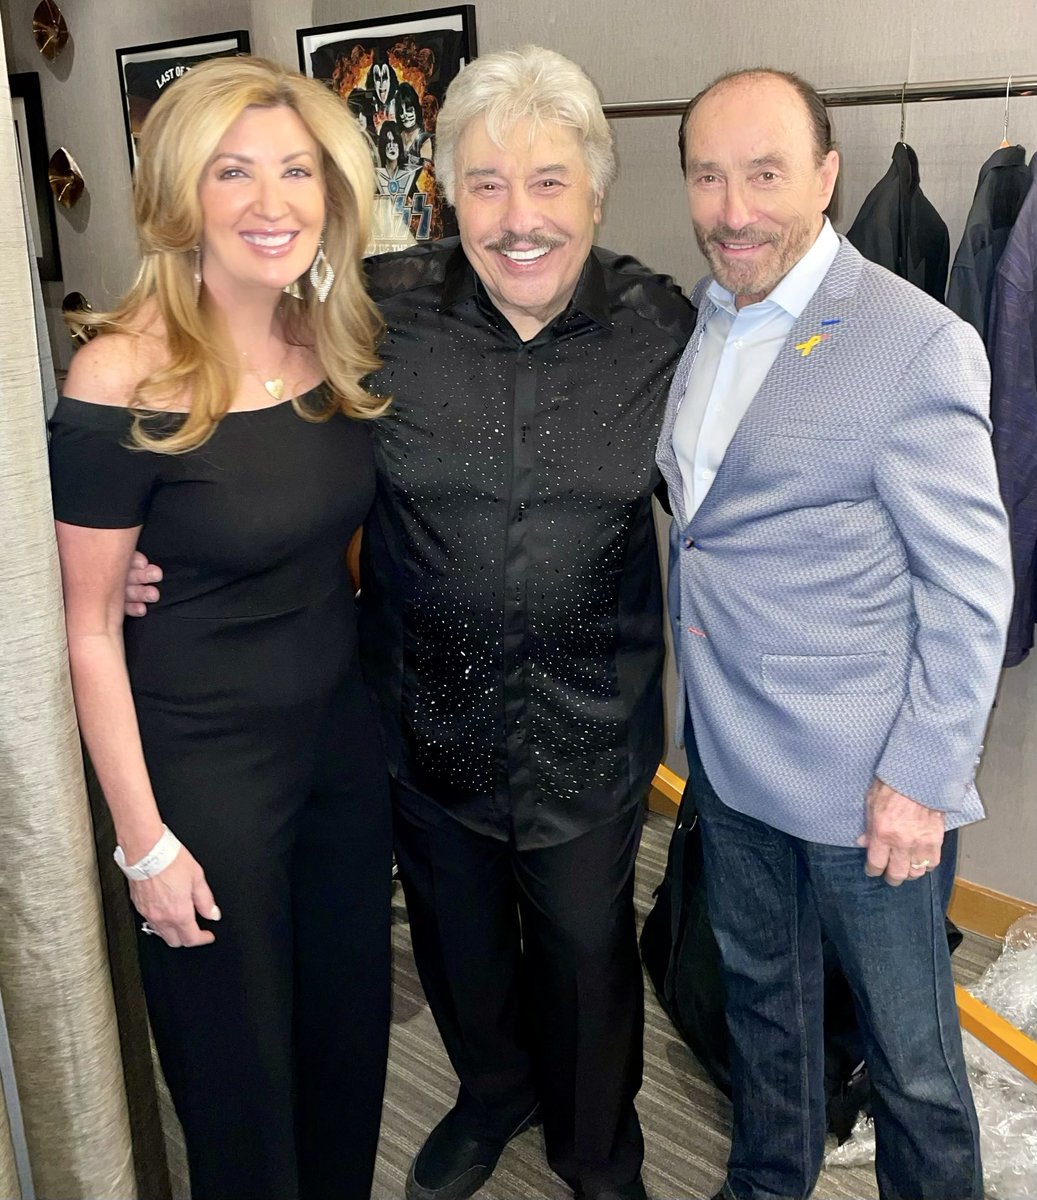 What a night! Last night at the Mohegan Sun in Connecticut, Tony Orlando proved he is a Mega Star! It was a fantastic tribute to one of the best entertainers ever to be on stage. Tony has been my close friend for decades and last night he demonstrated how gracious and giving he…